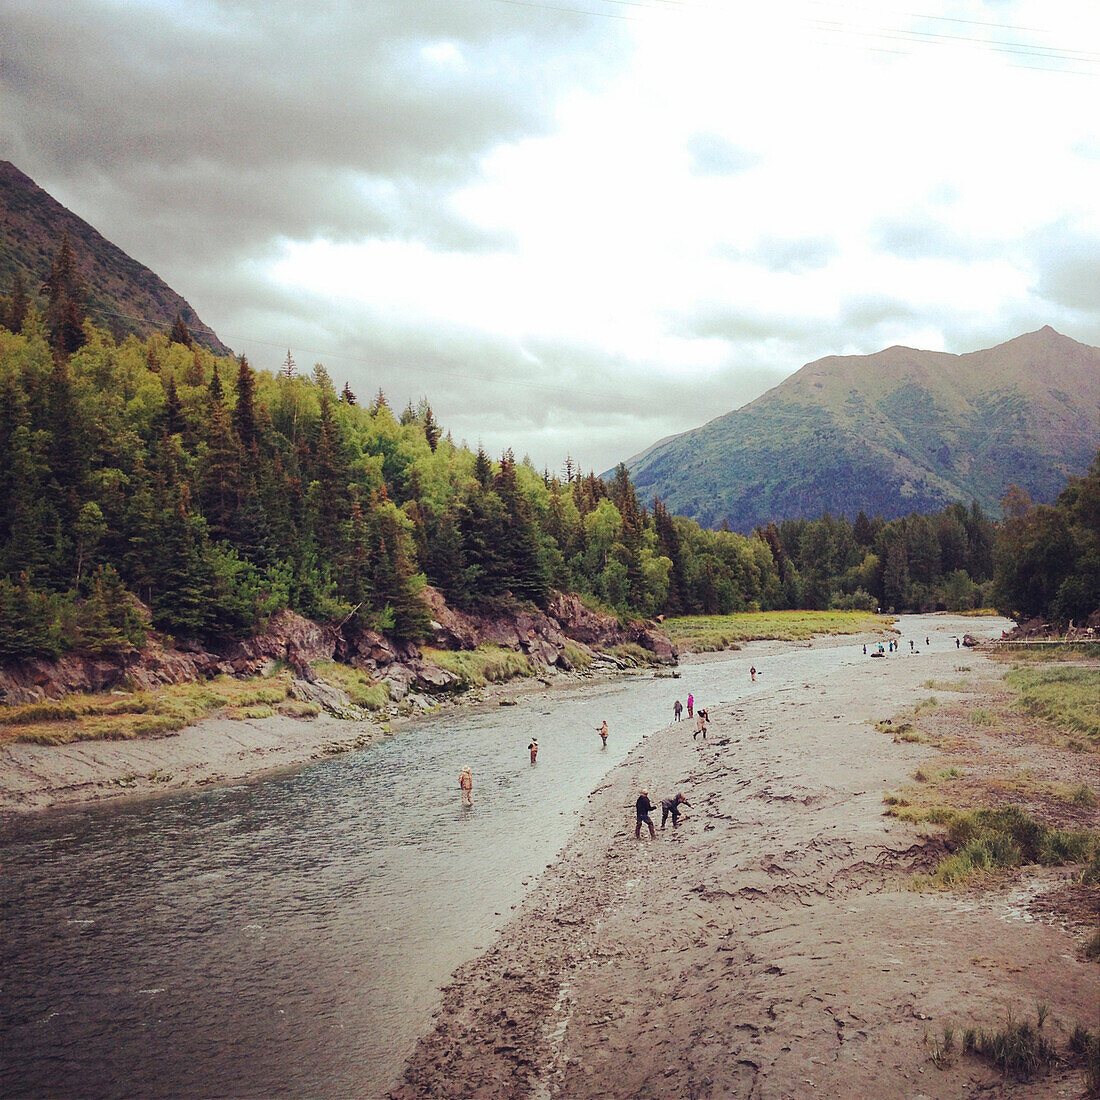 Fly fishing in river near the mountains in Alaska.